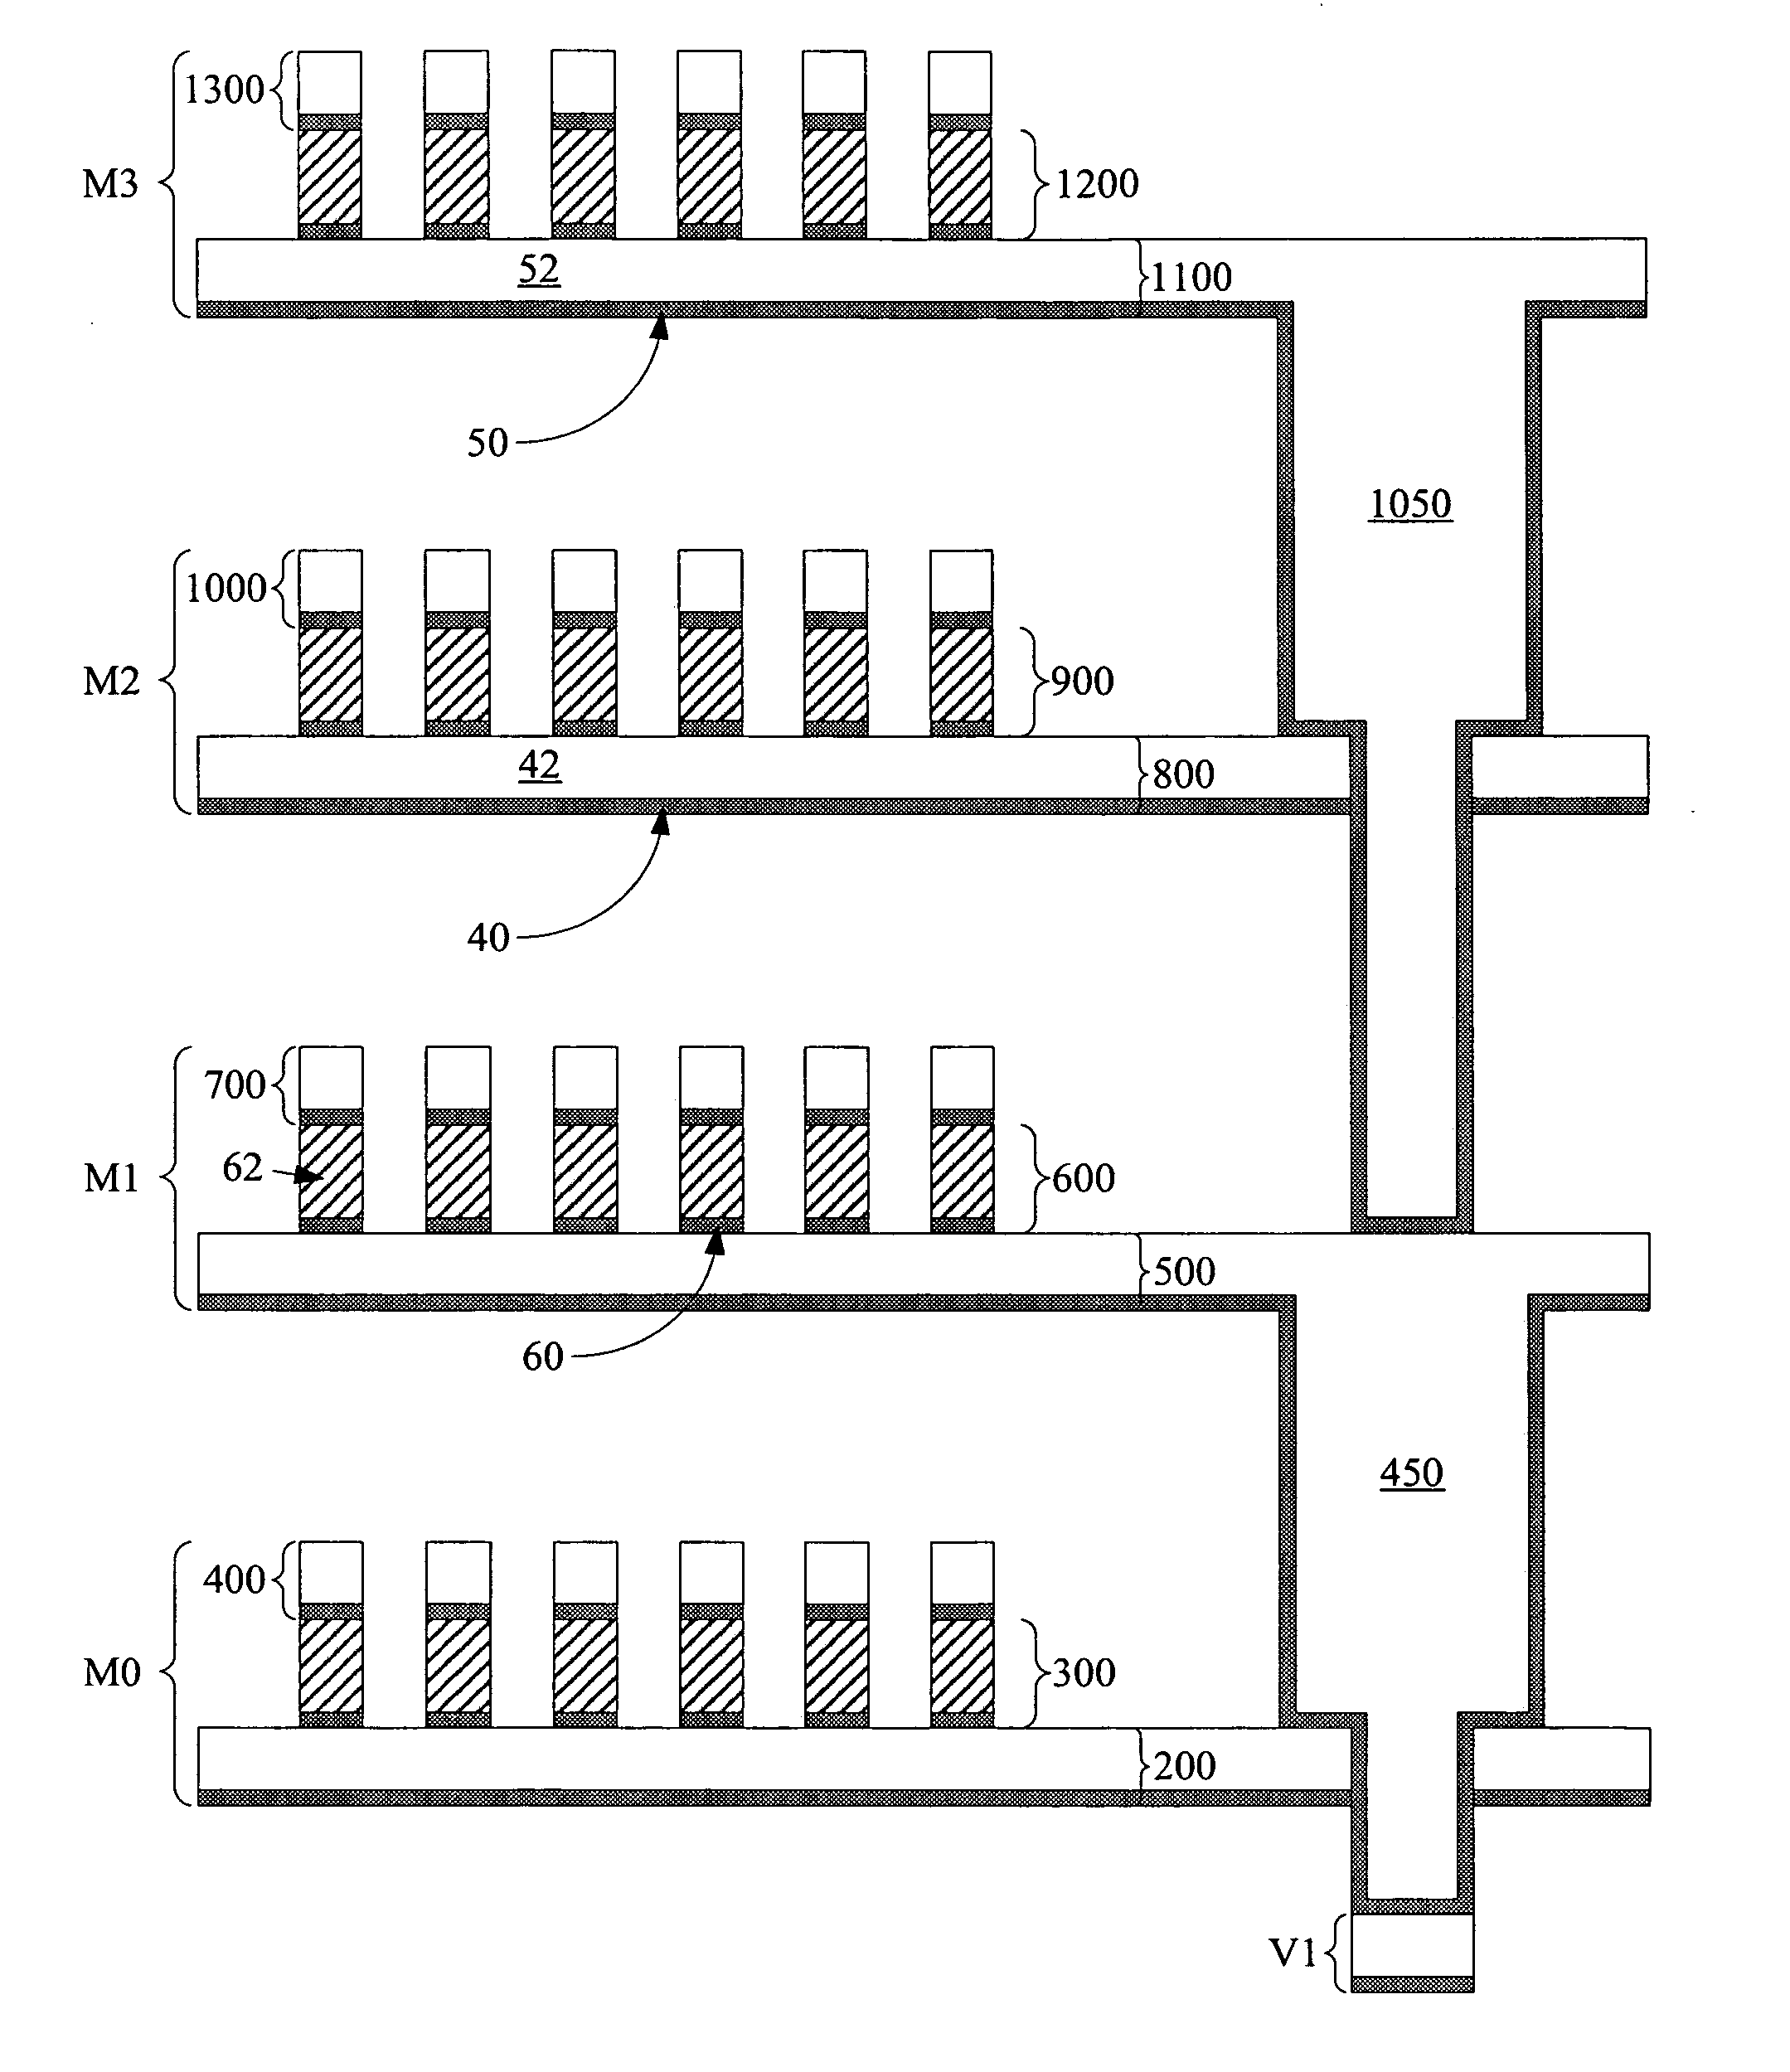 Masking of repeated overlay and alignment marks to allow reuse of photomasks in a vertical structure